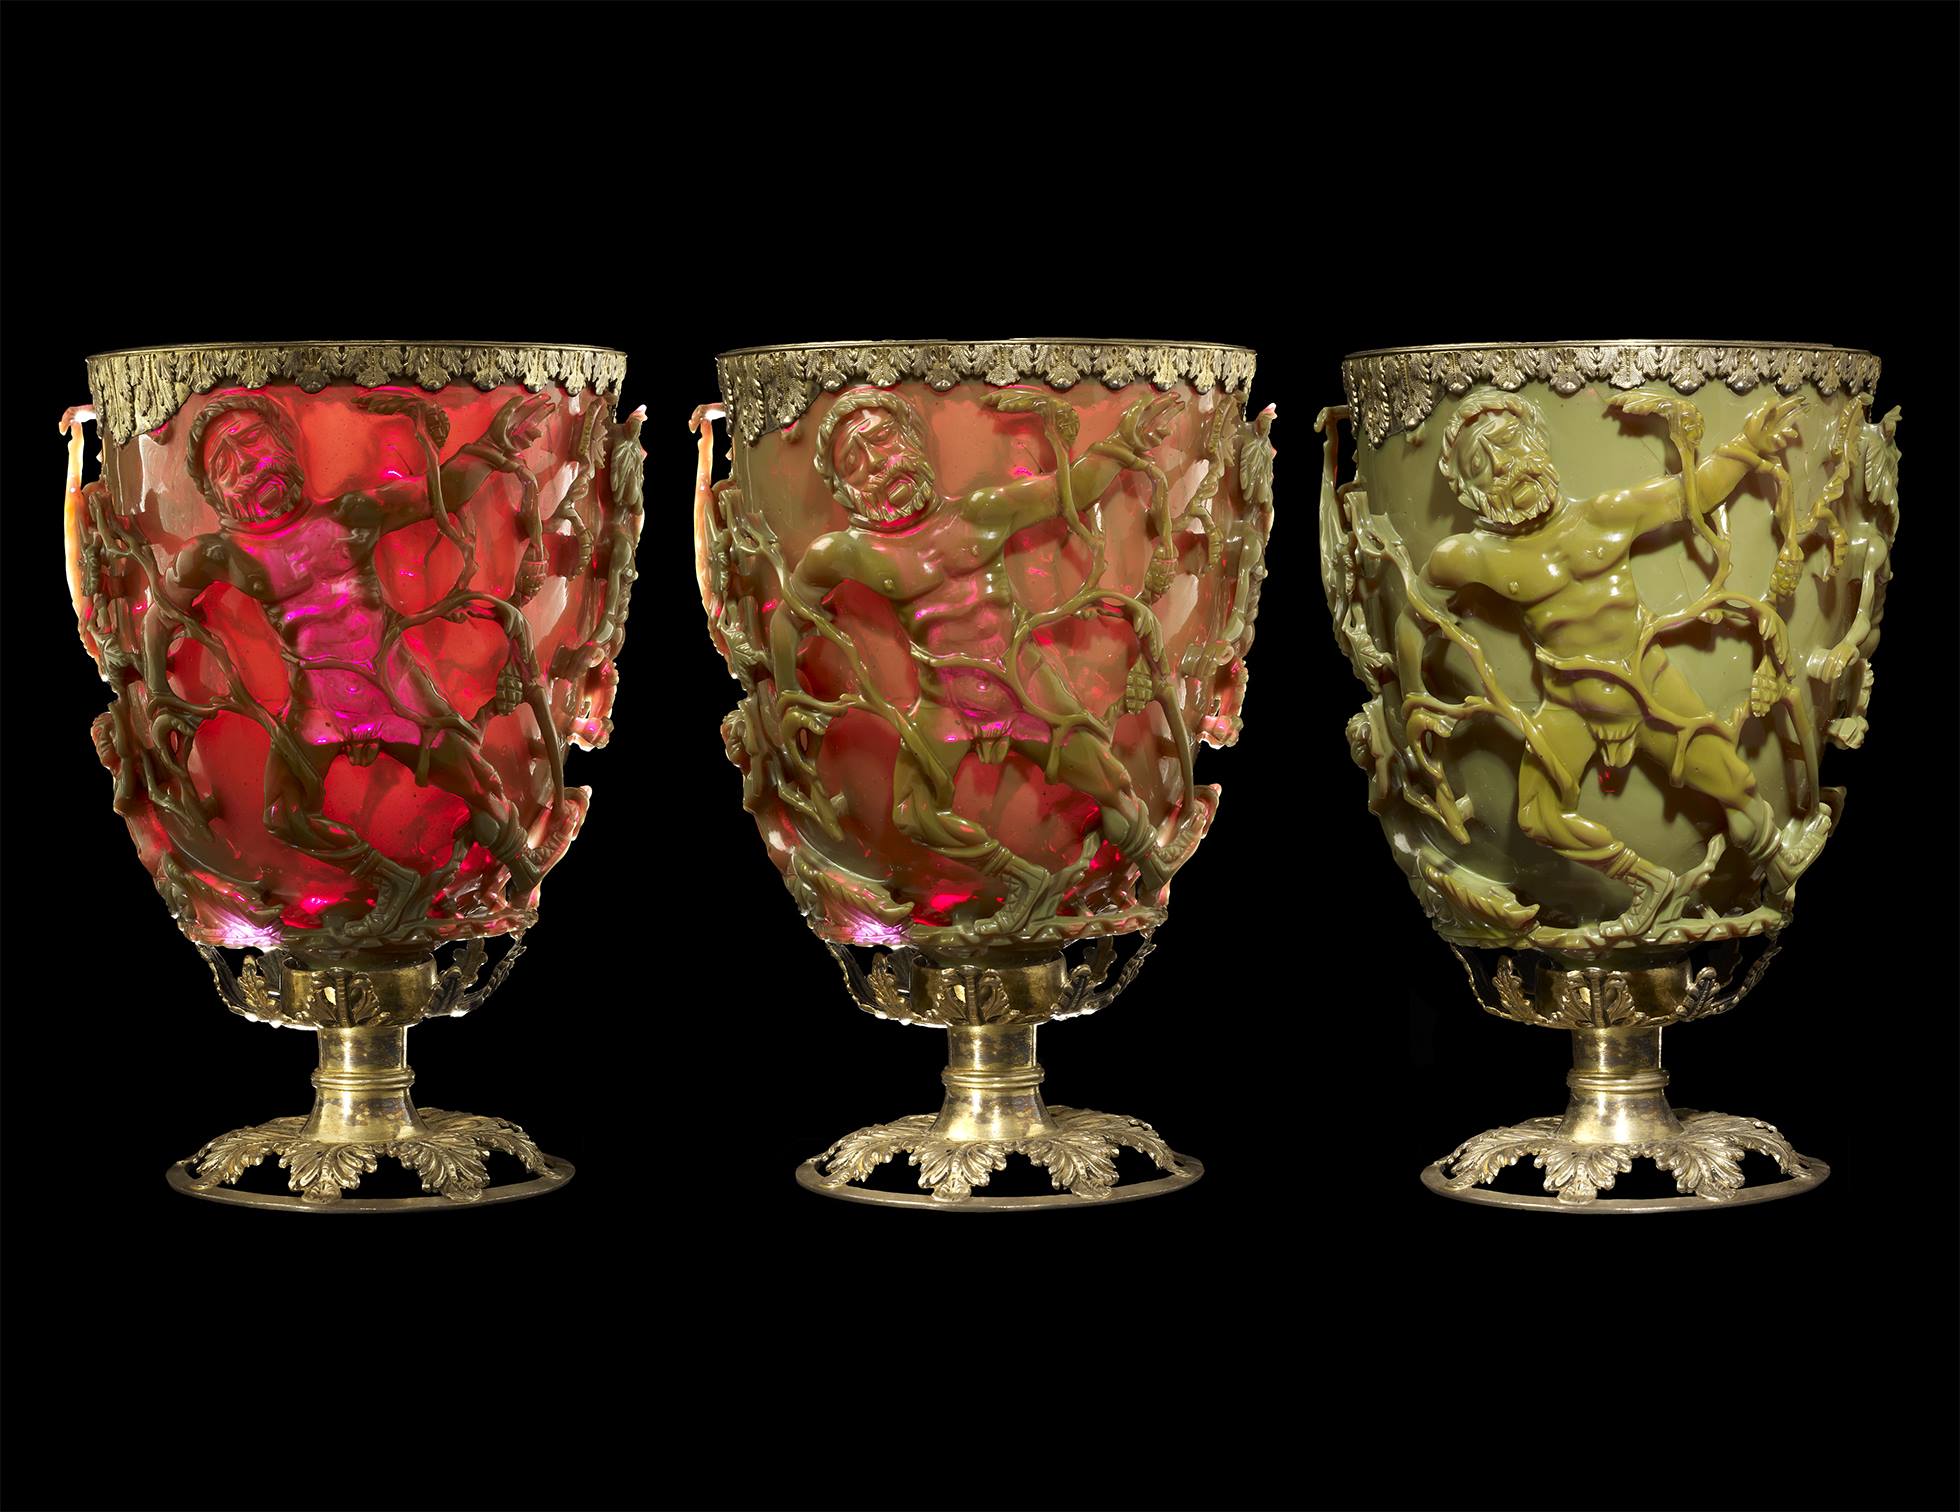 The Lycurgus Cup. Image Credit: British Museum.